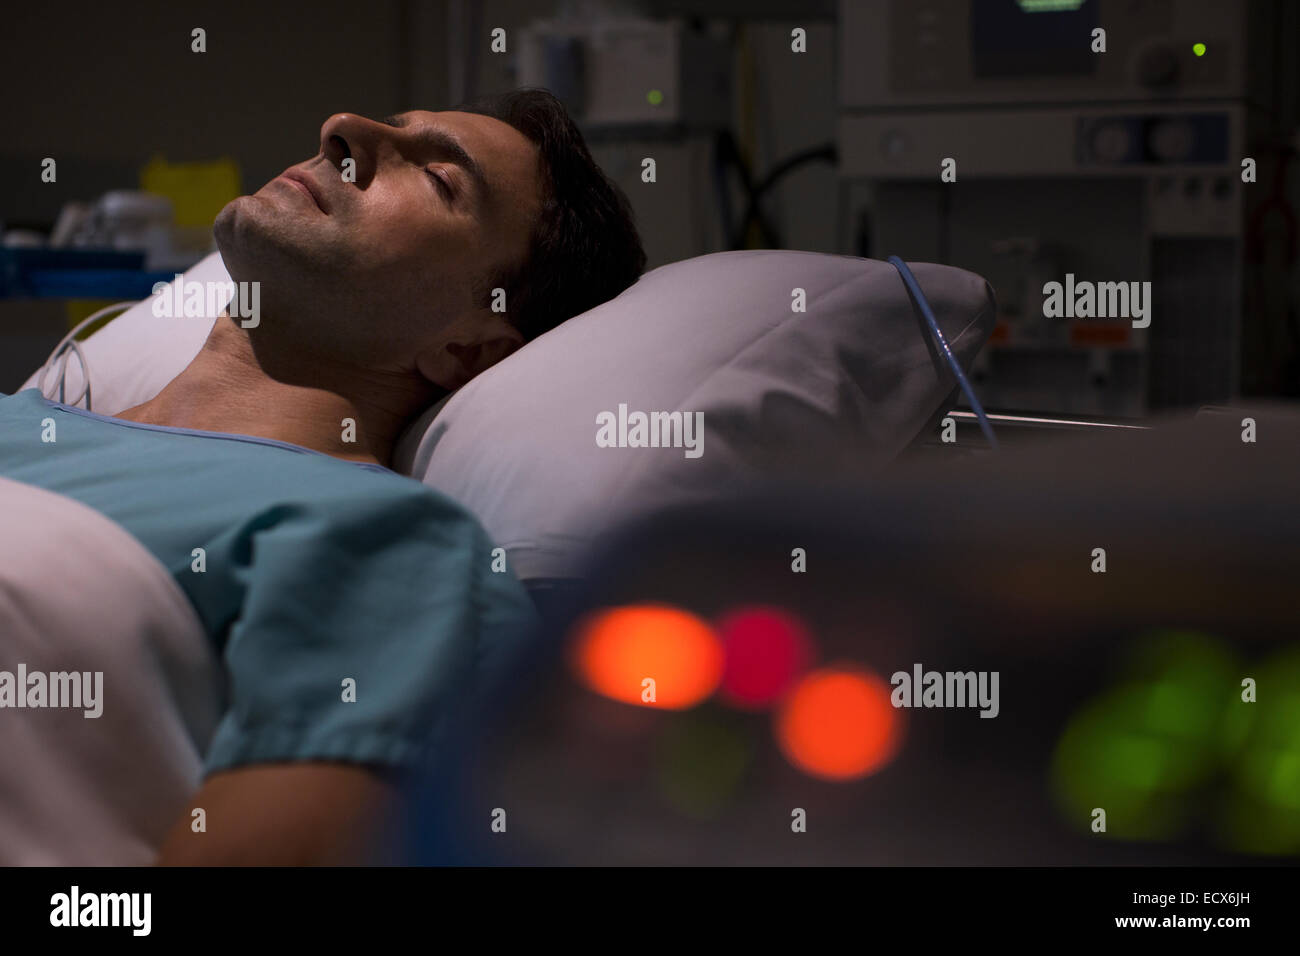 Patient lying in hospital bed in intensive care unit, medical equipment in foreground Stock Photo